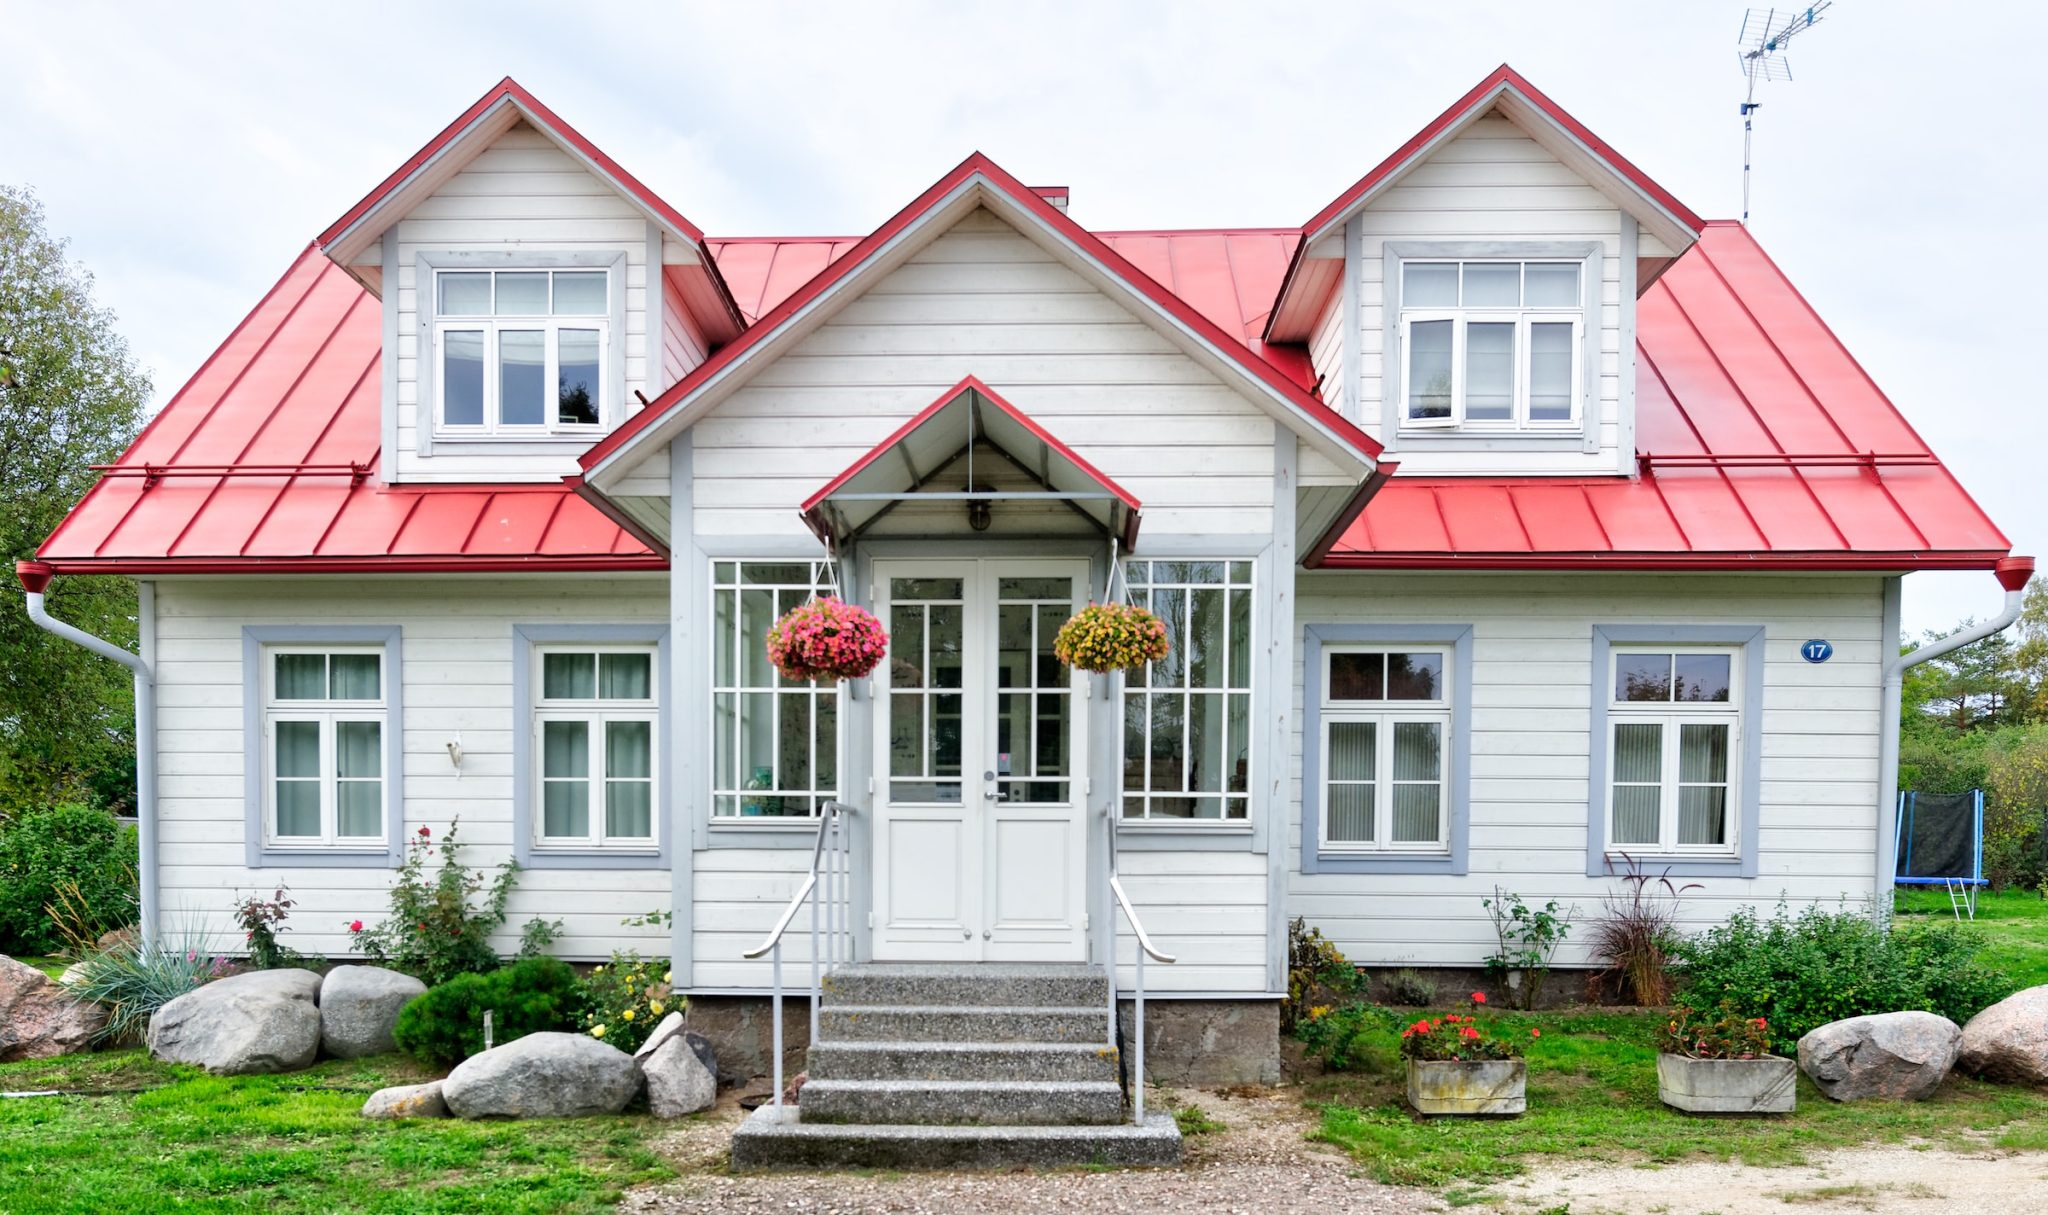 Improving your home's exterior: when should you call the experts?